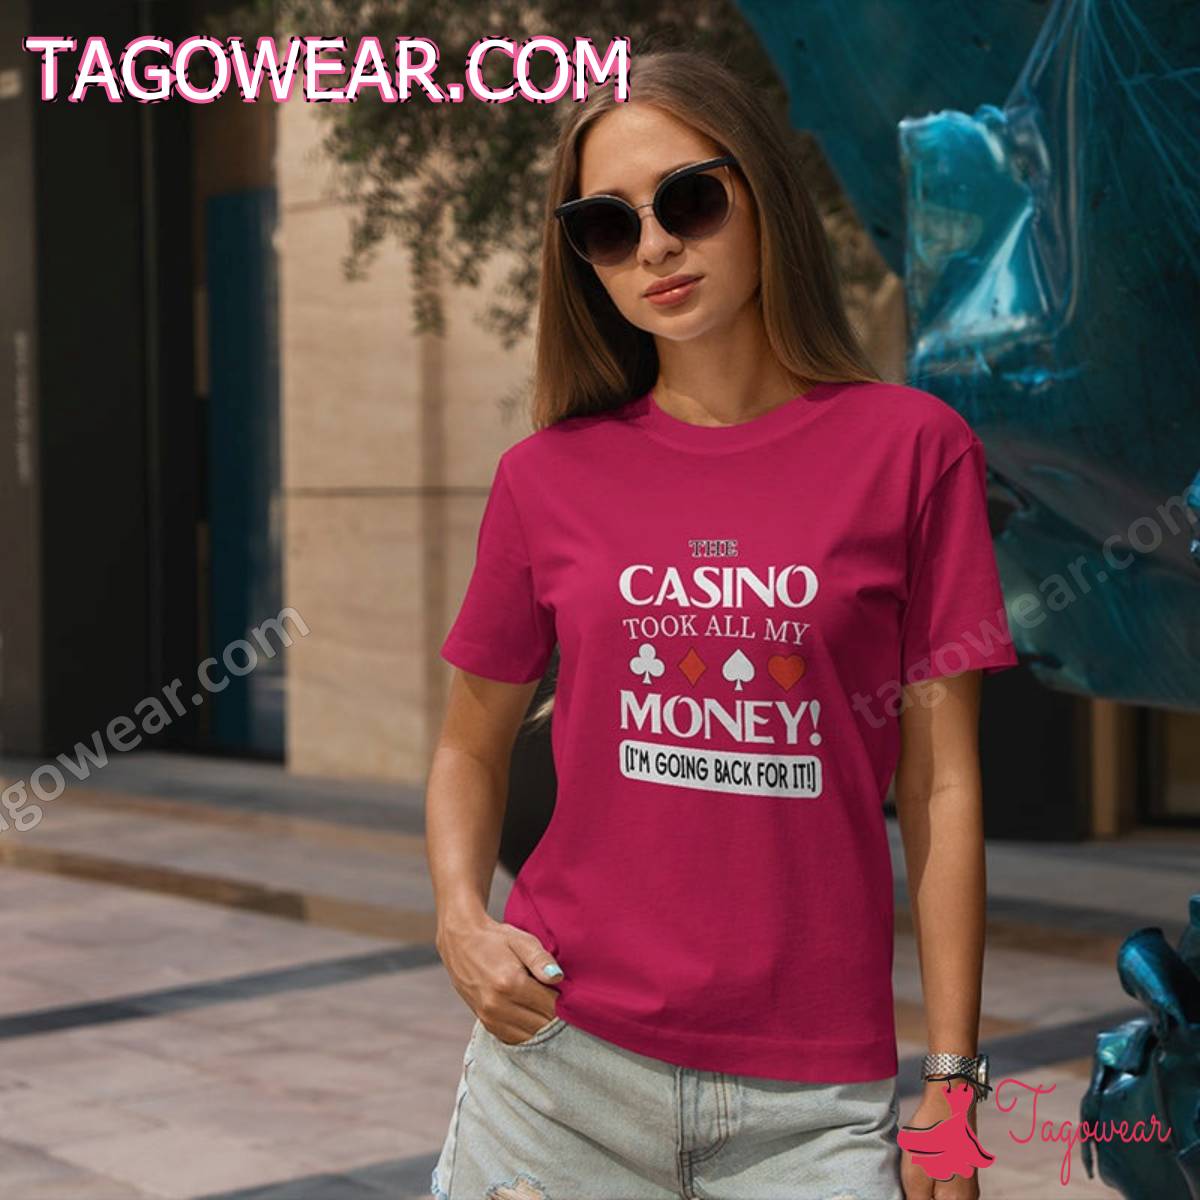 The Casino Took All My Money I'm Going Back For It Shirt